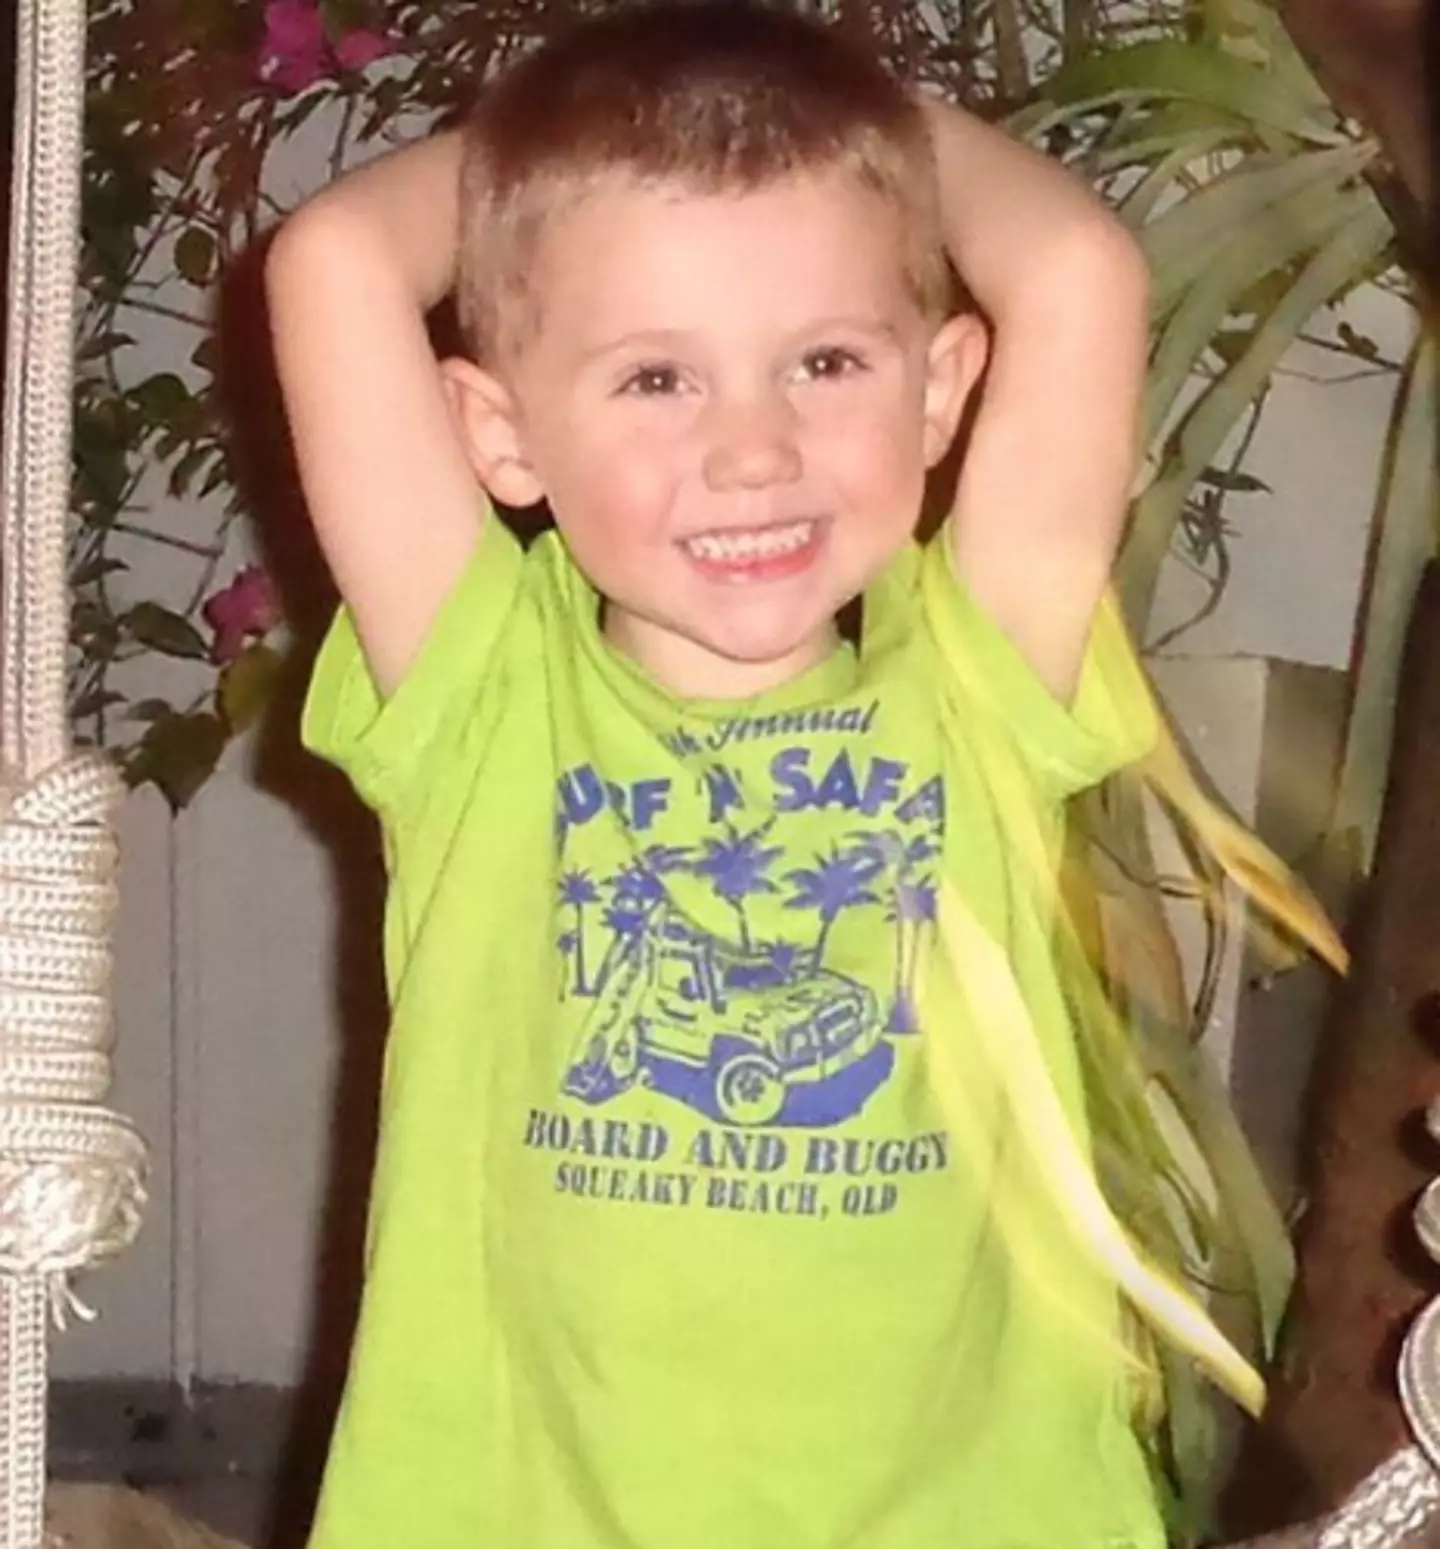 William Tyrrell would have been 12 years old today.